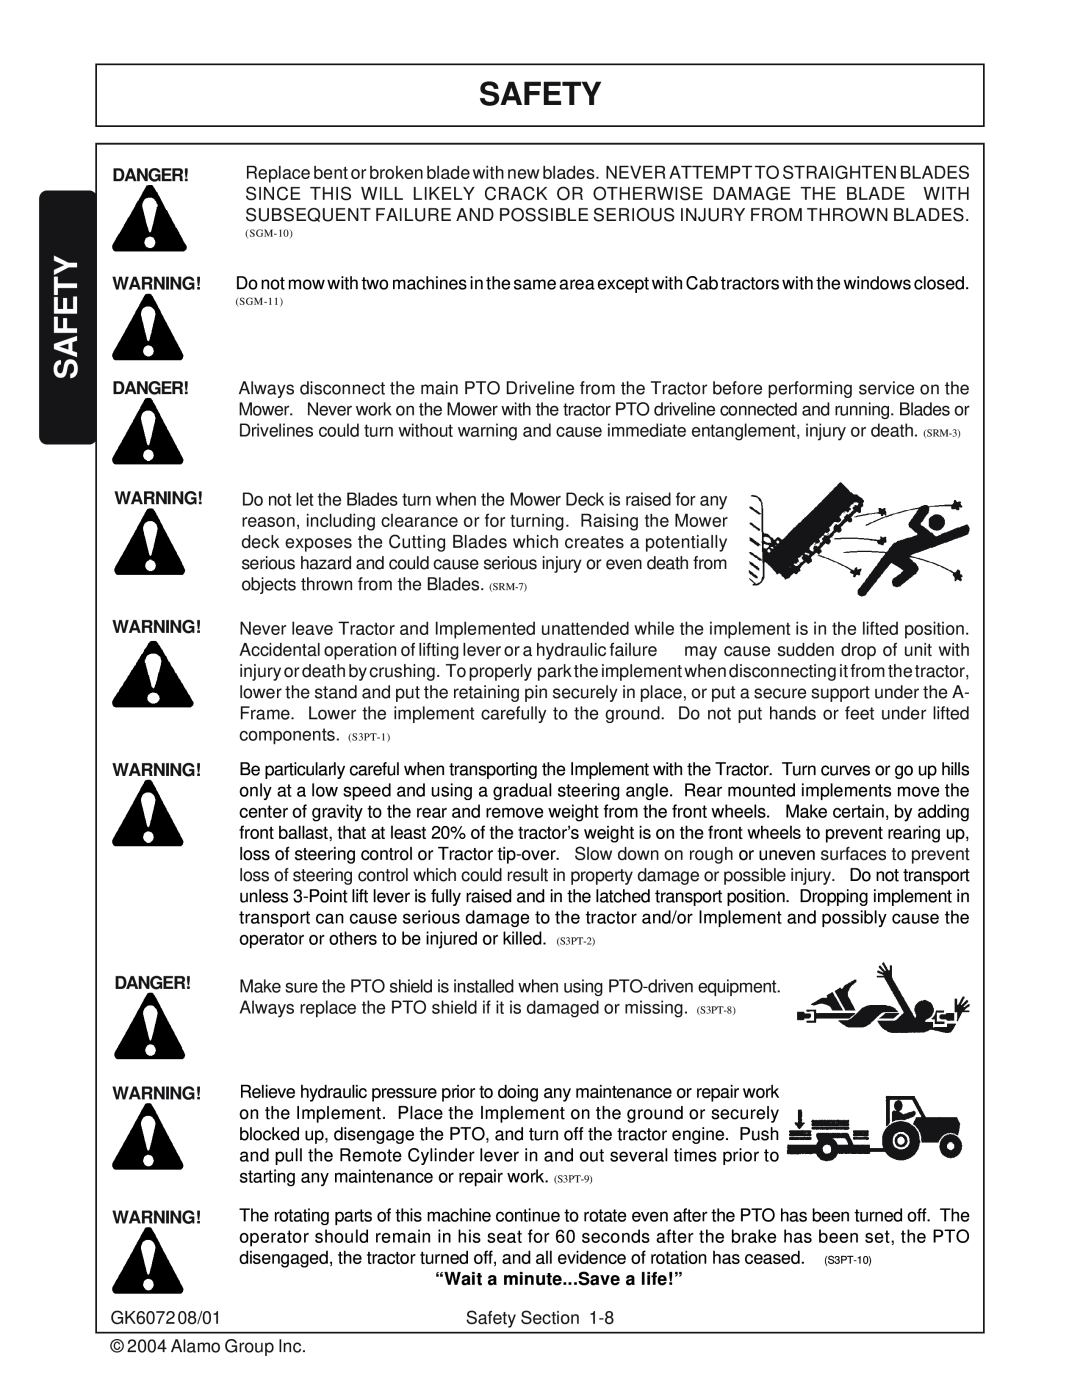 Rhino Mounts GK6072 manual Safety, Danger, “Wait a minute...Save a life!” 